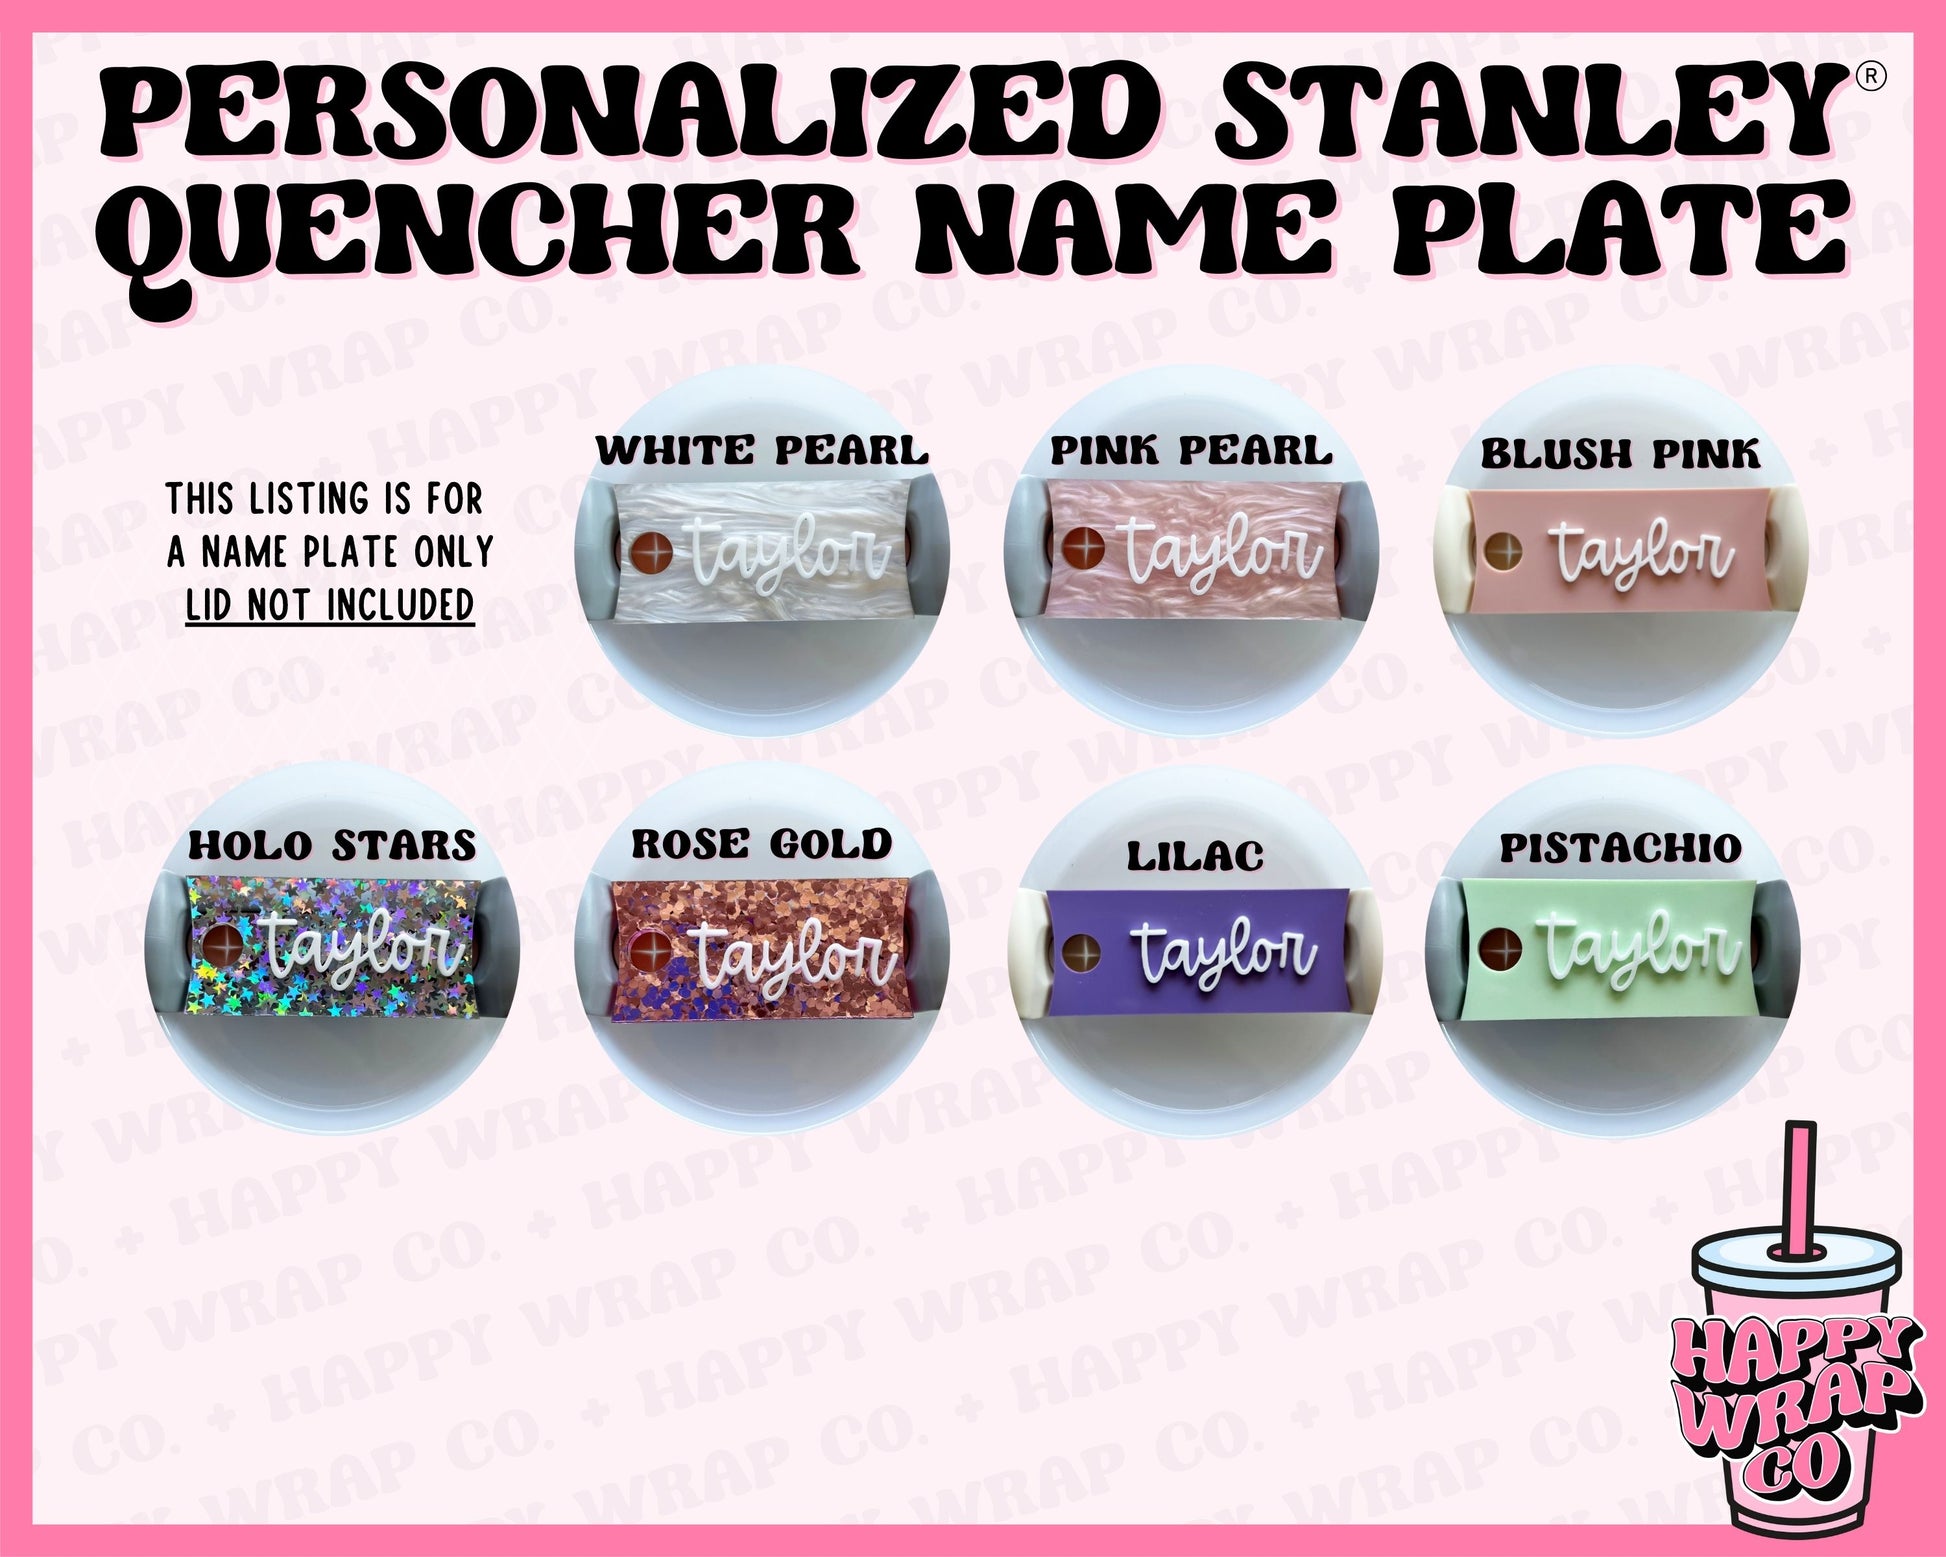 Stanley 30 oz Personalized Name Plate – The KerbyGrace Collection